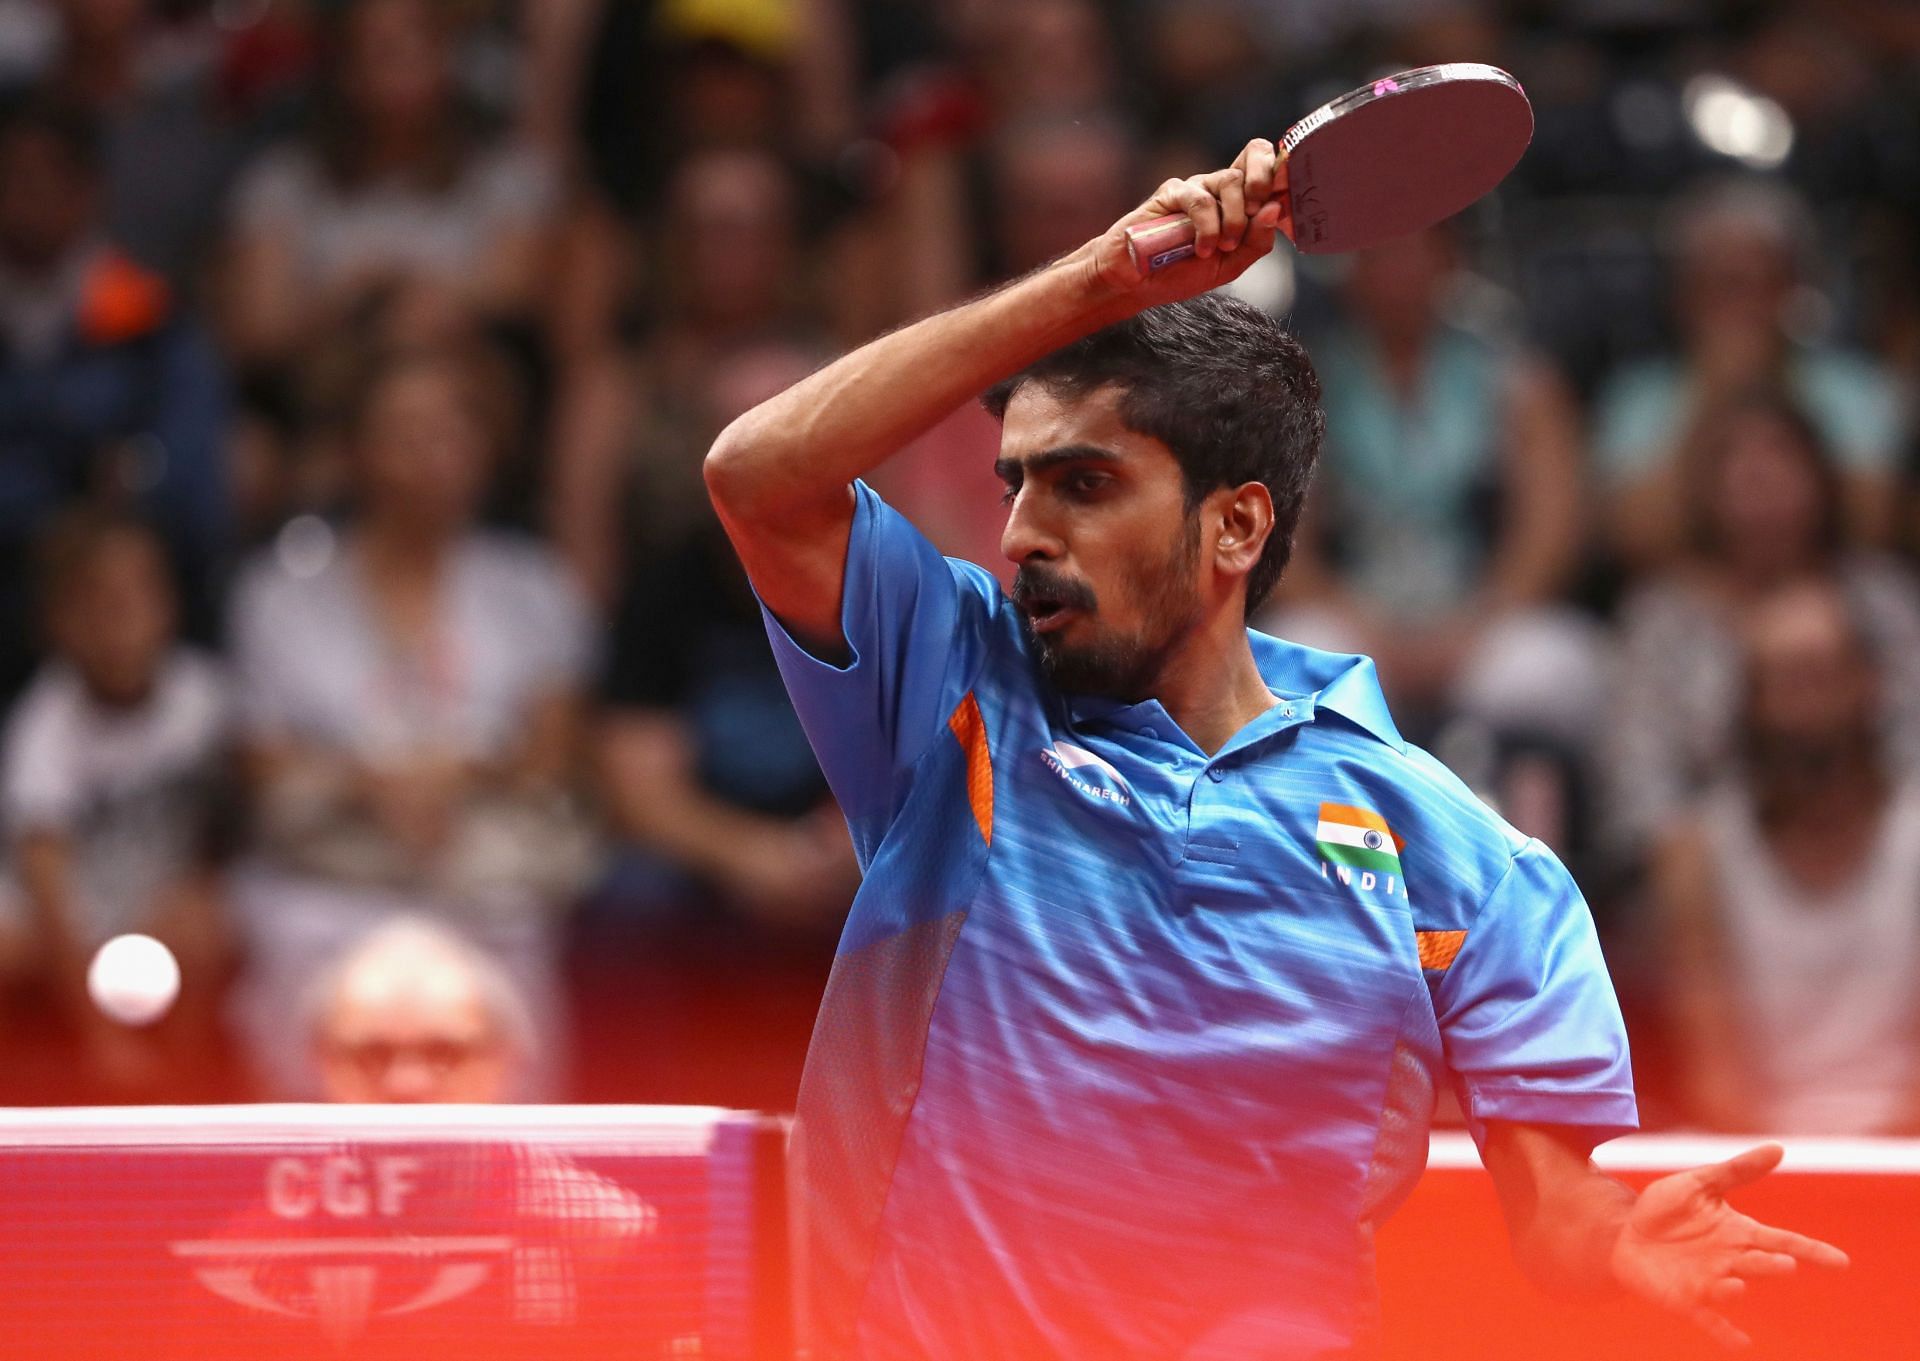 Table Tennis - Sathiyan Gnanasekaran in action during the Commonwealth Games.